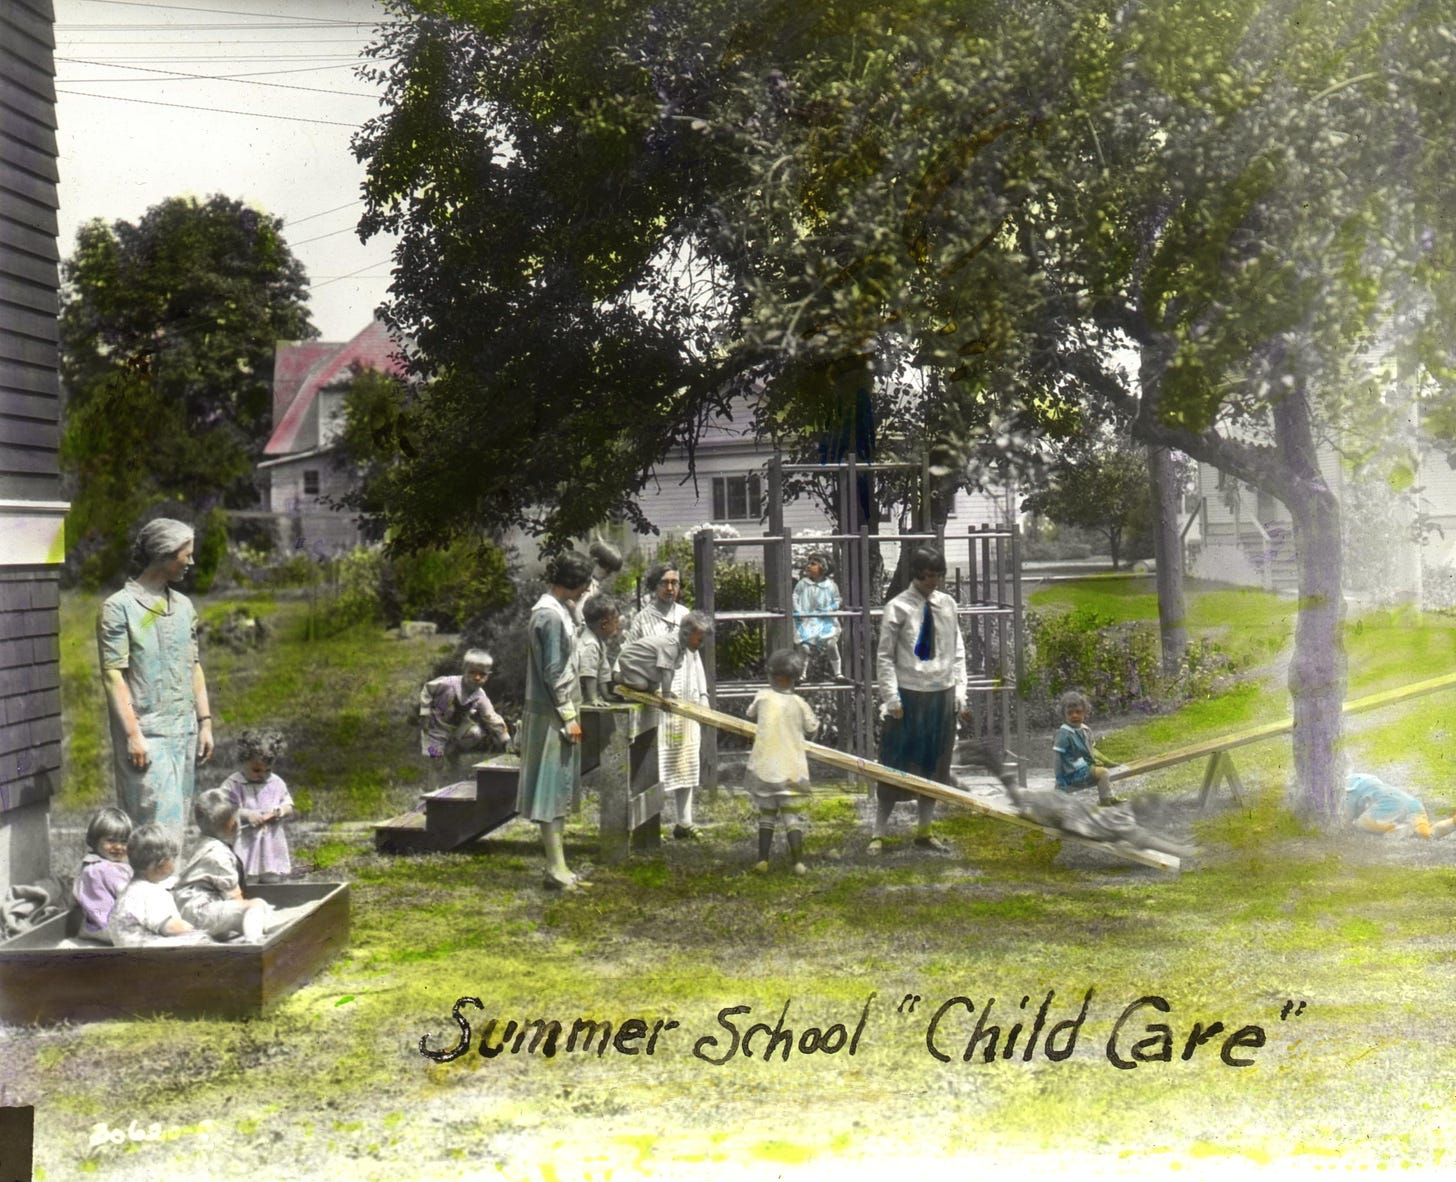 Old fashioned photo of adults watching children play on a small playground